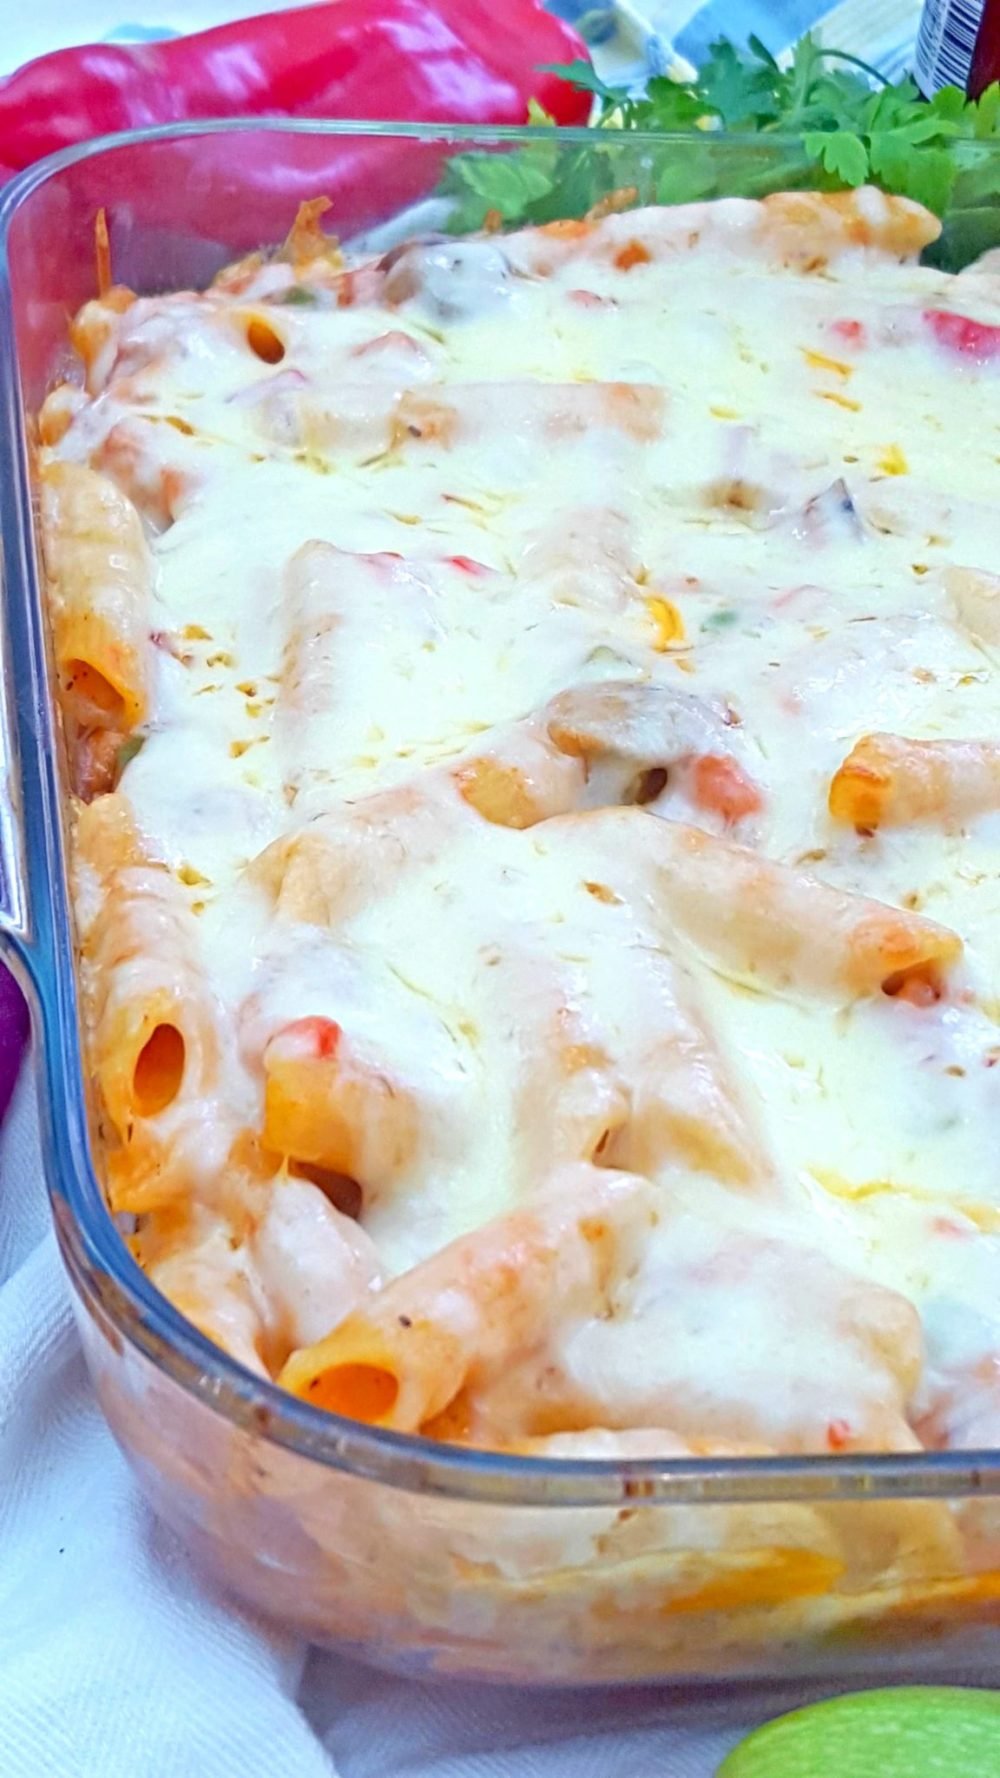 Savor your favorite pasta dish fresh out of the oven with this delicious creamy baked pasta recipe!